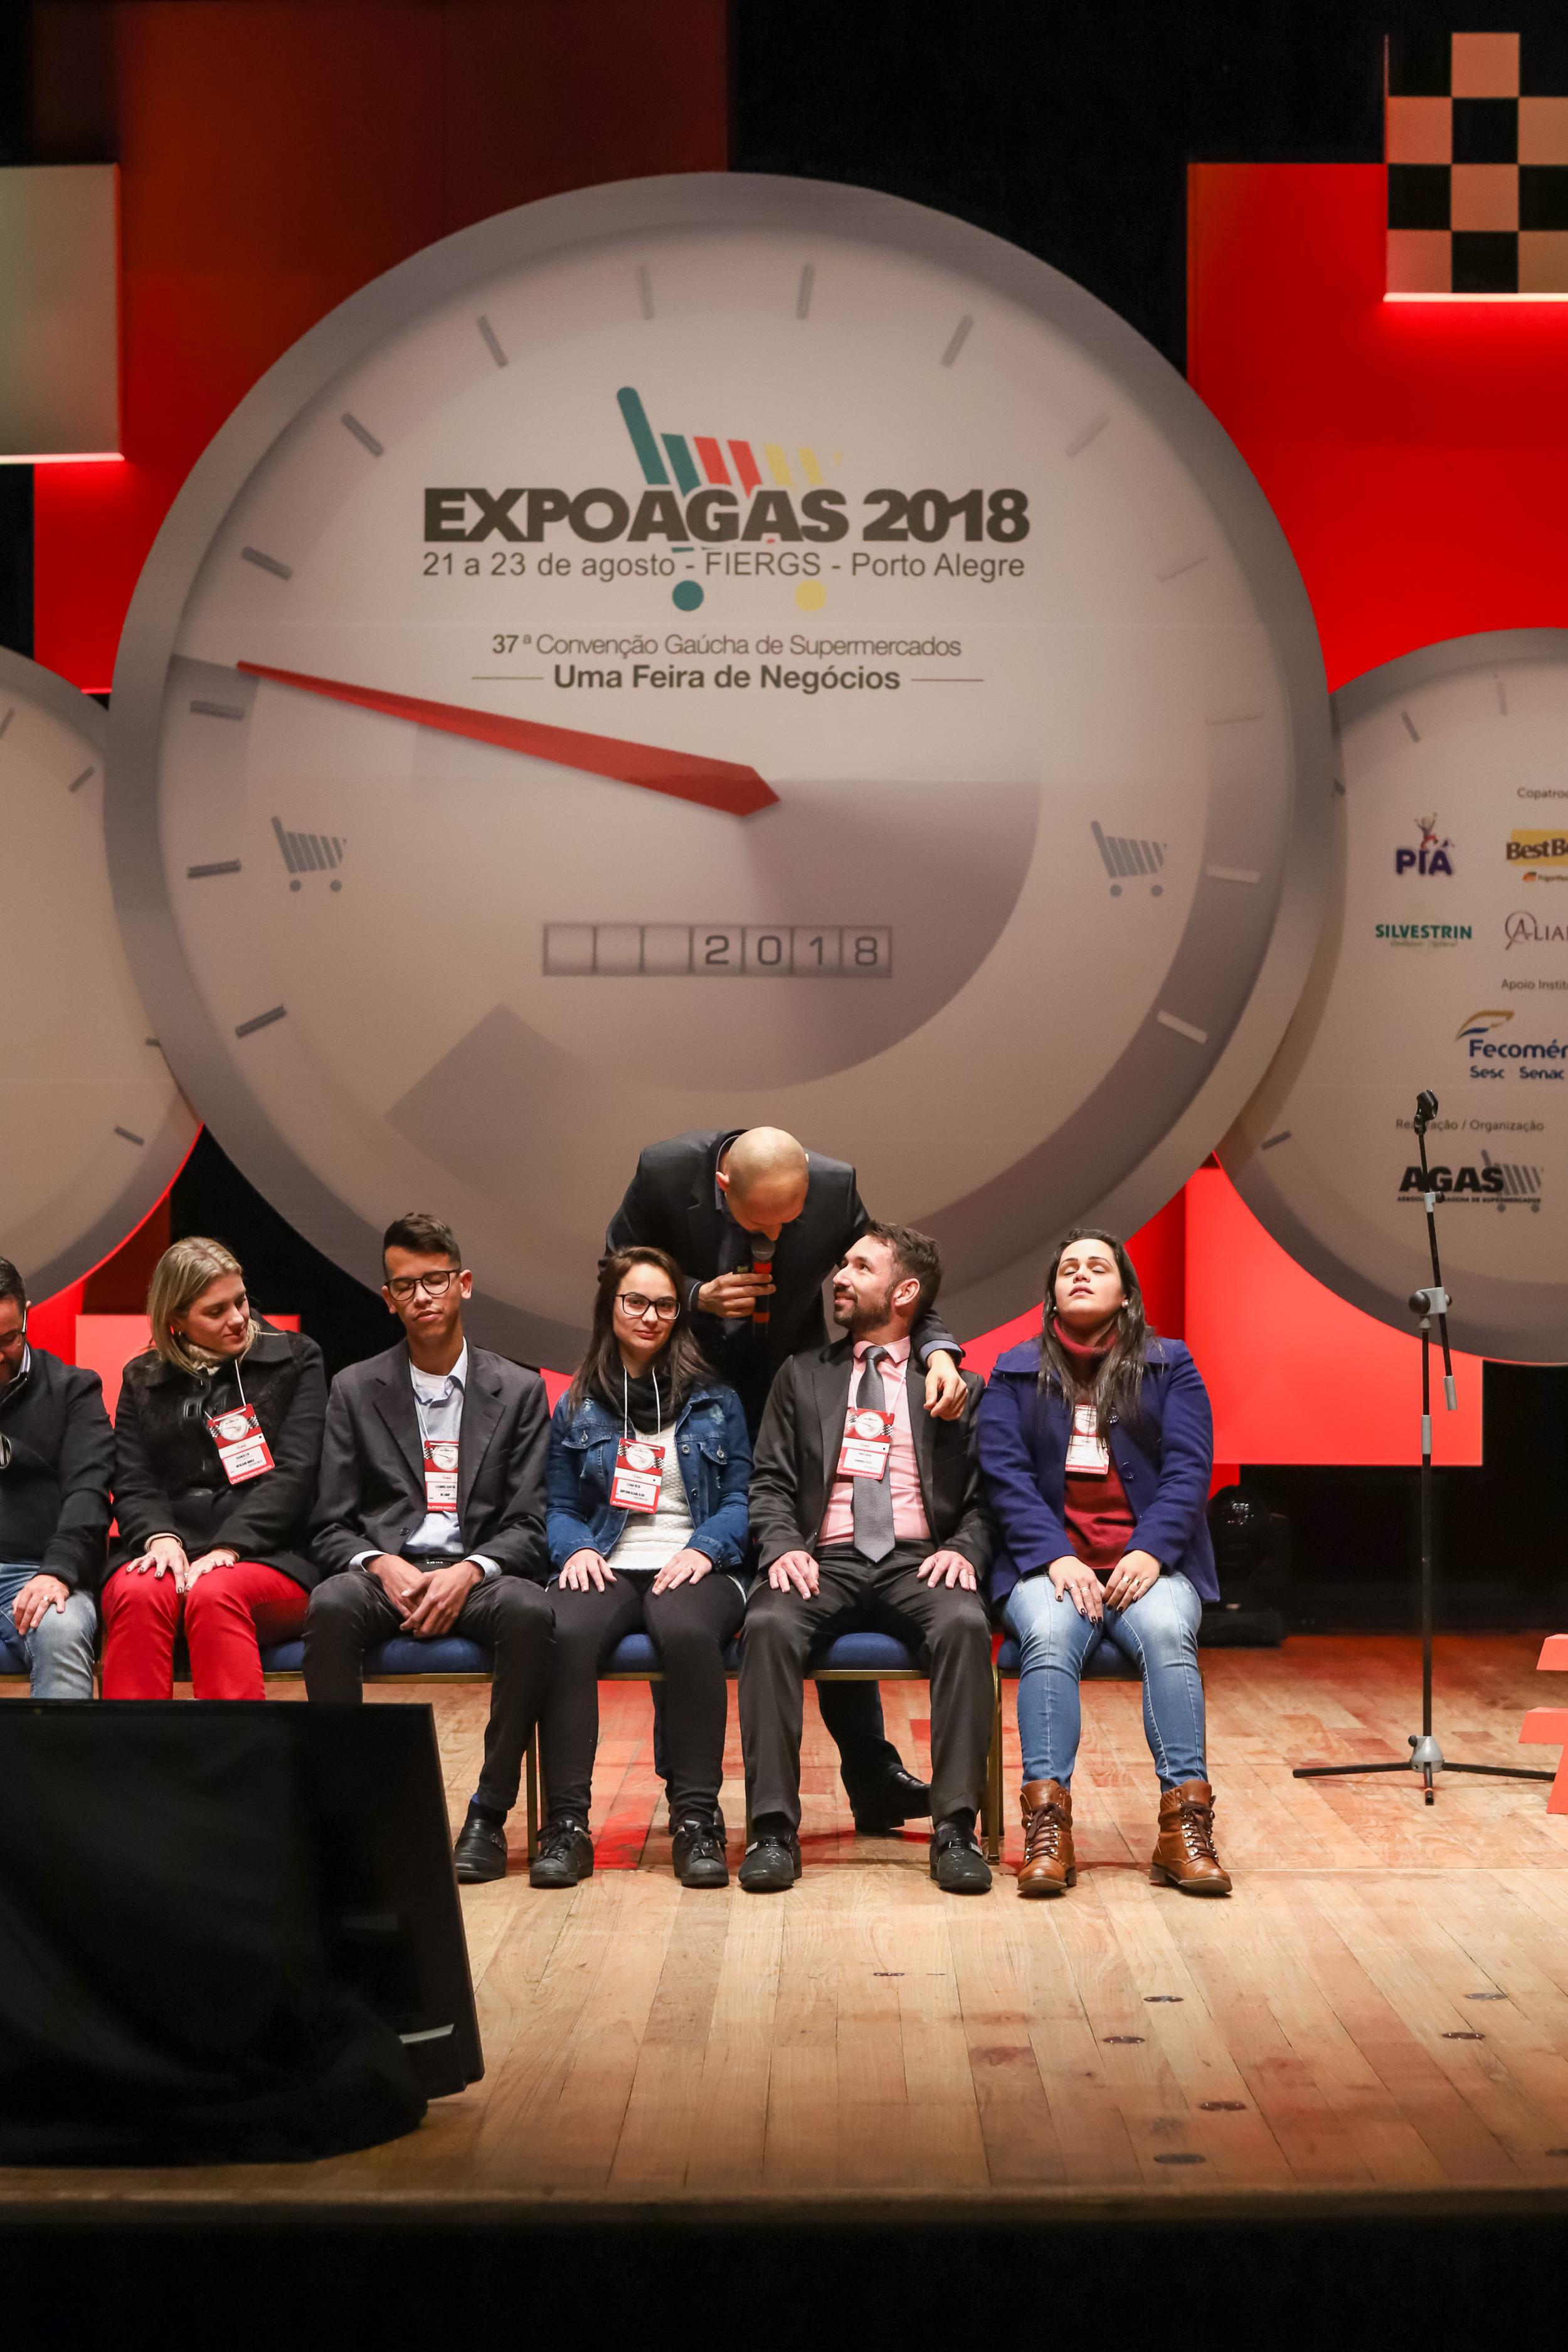 AGAS - EXPOGAS 2018 (28)